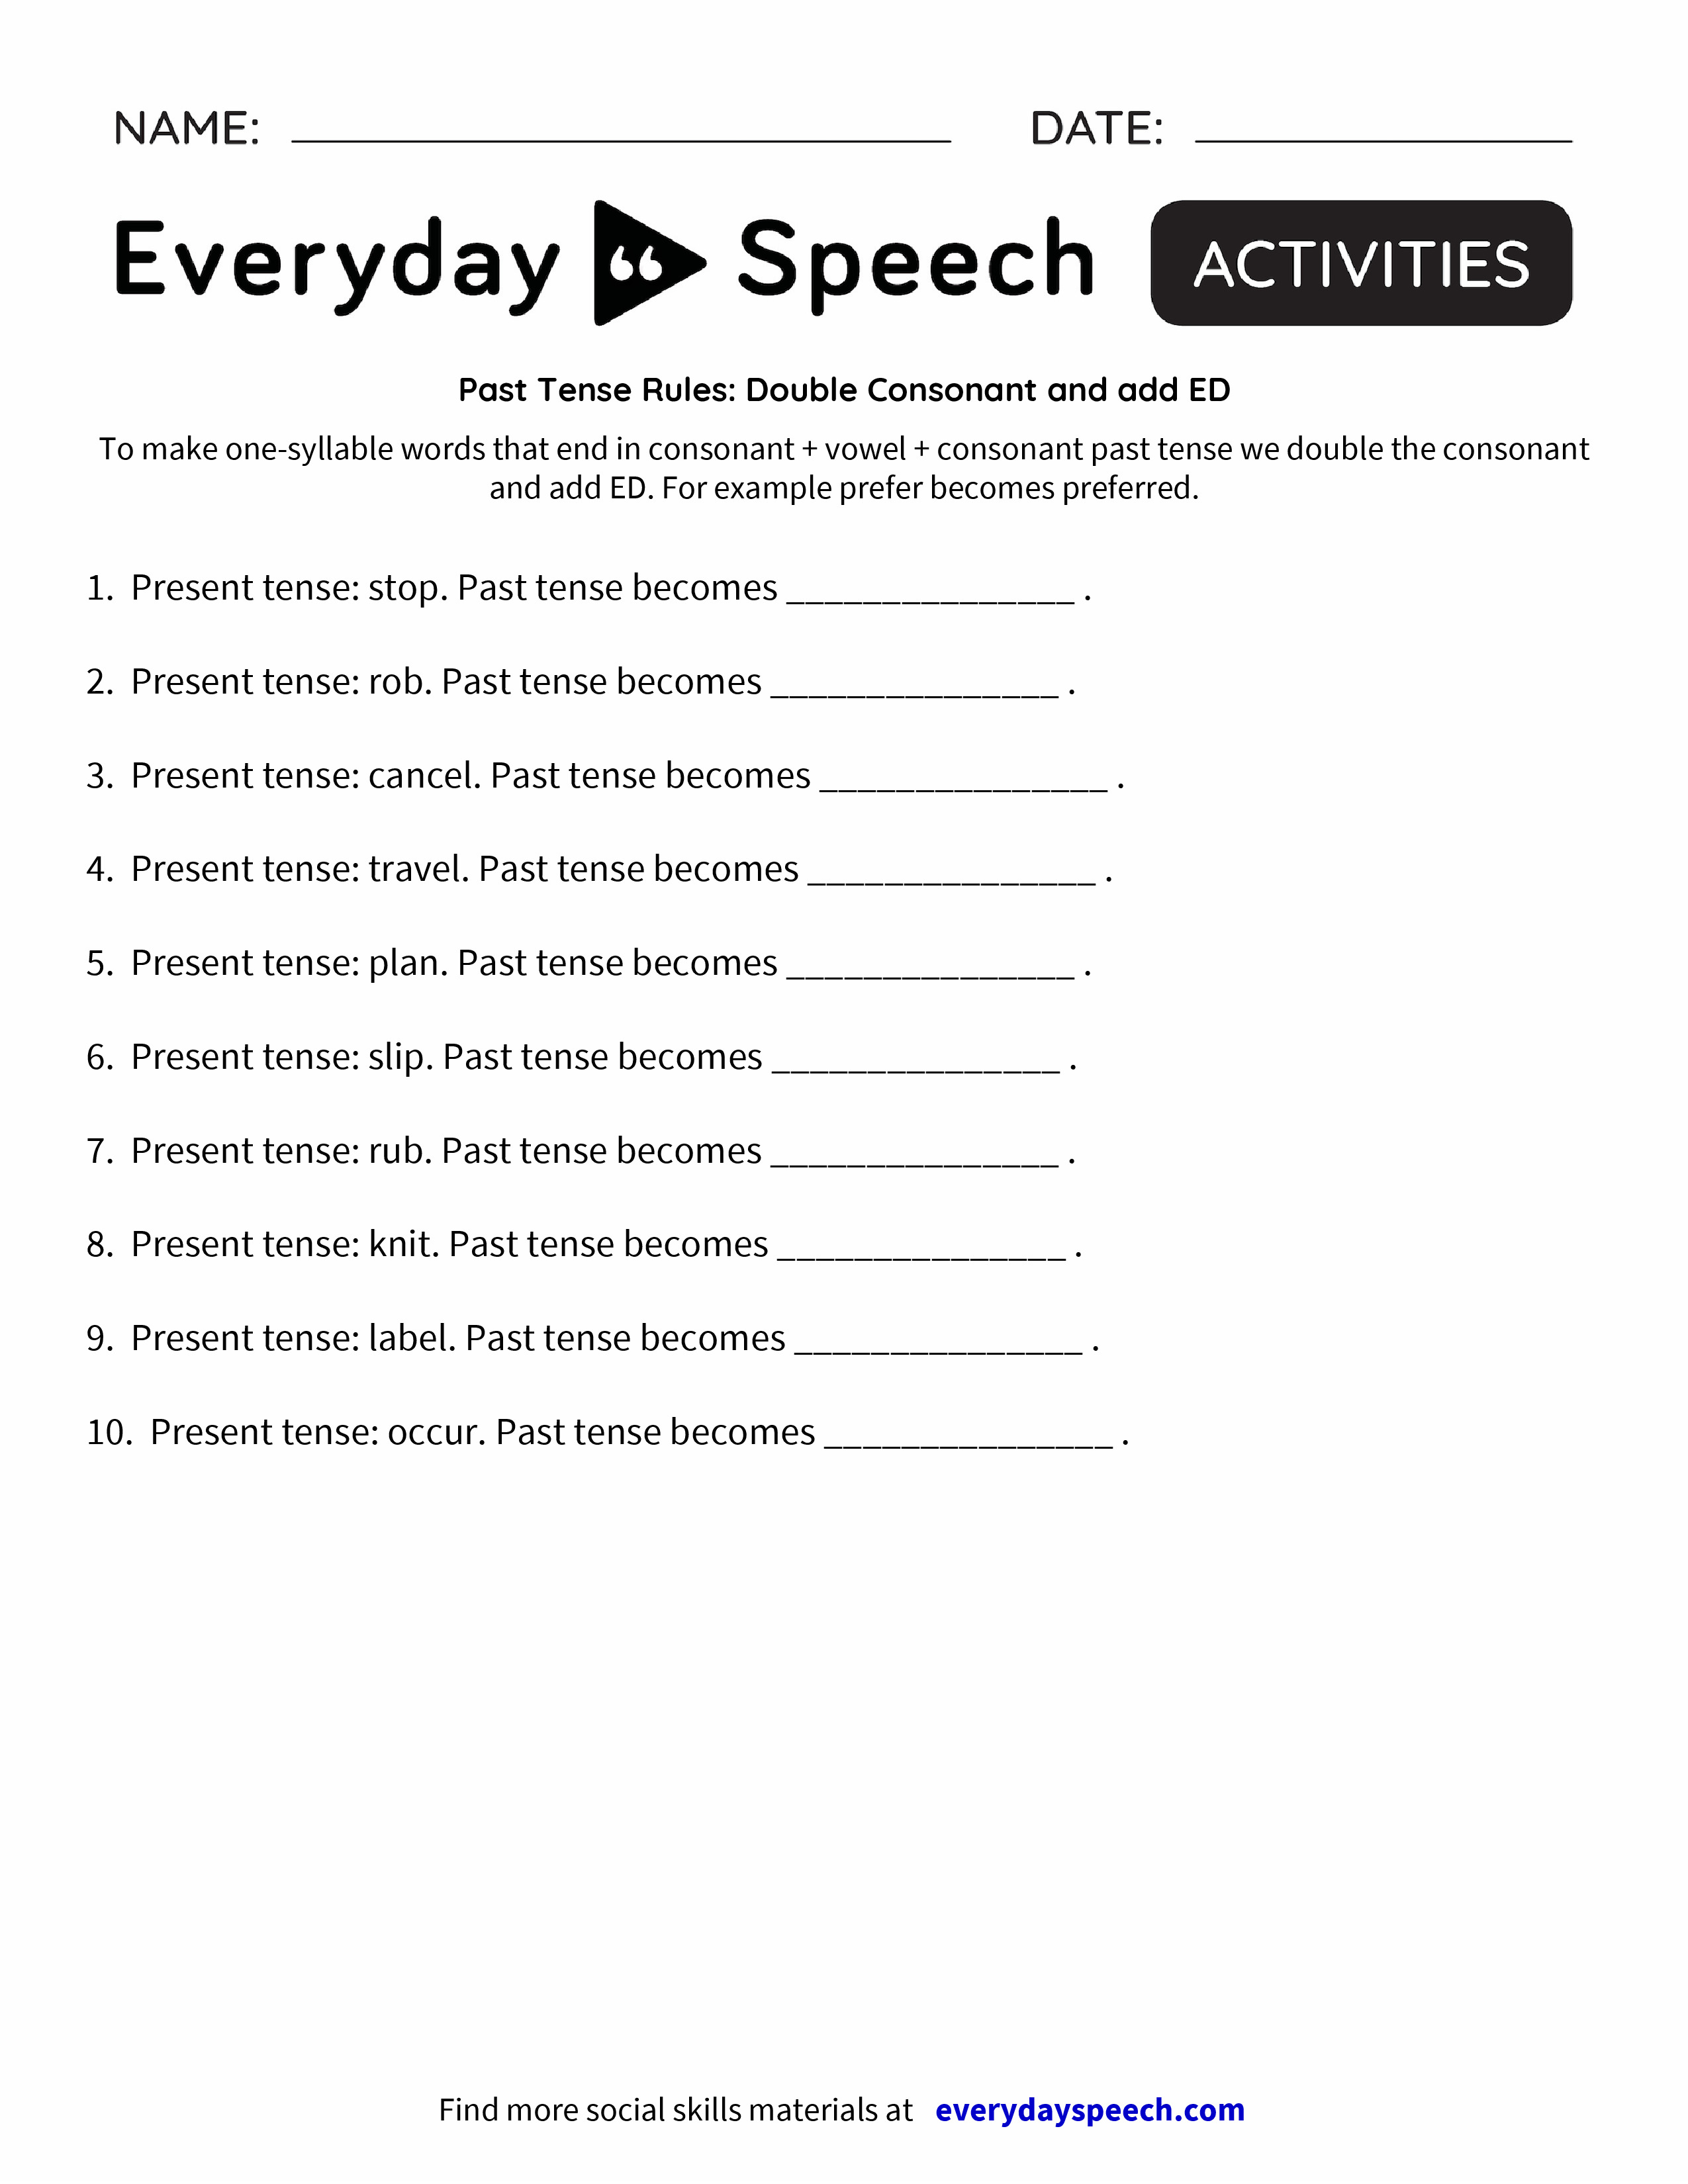 past-tense-rules-double-consonant-and-add-ed-everyday-speech-everyday-speech